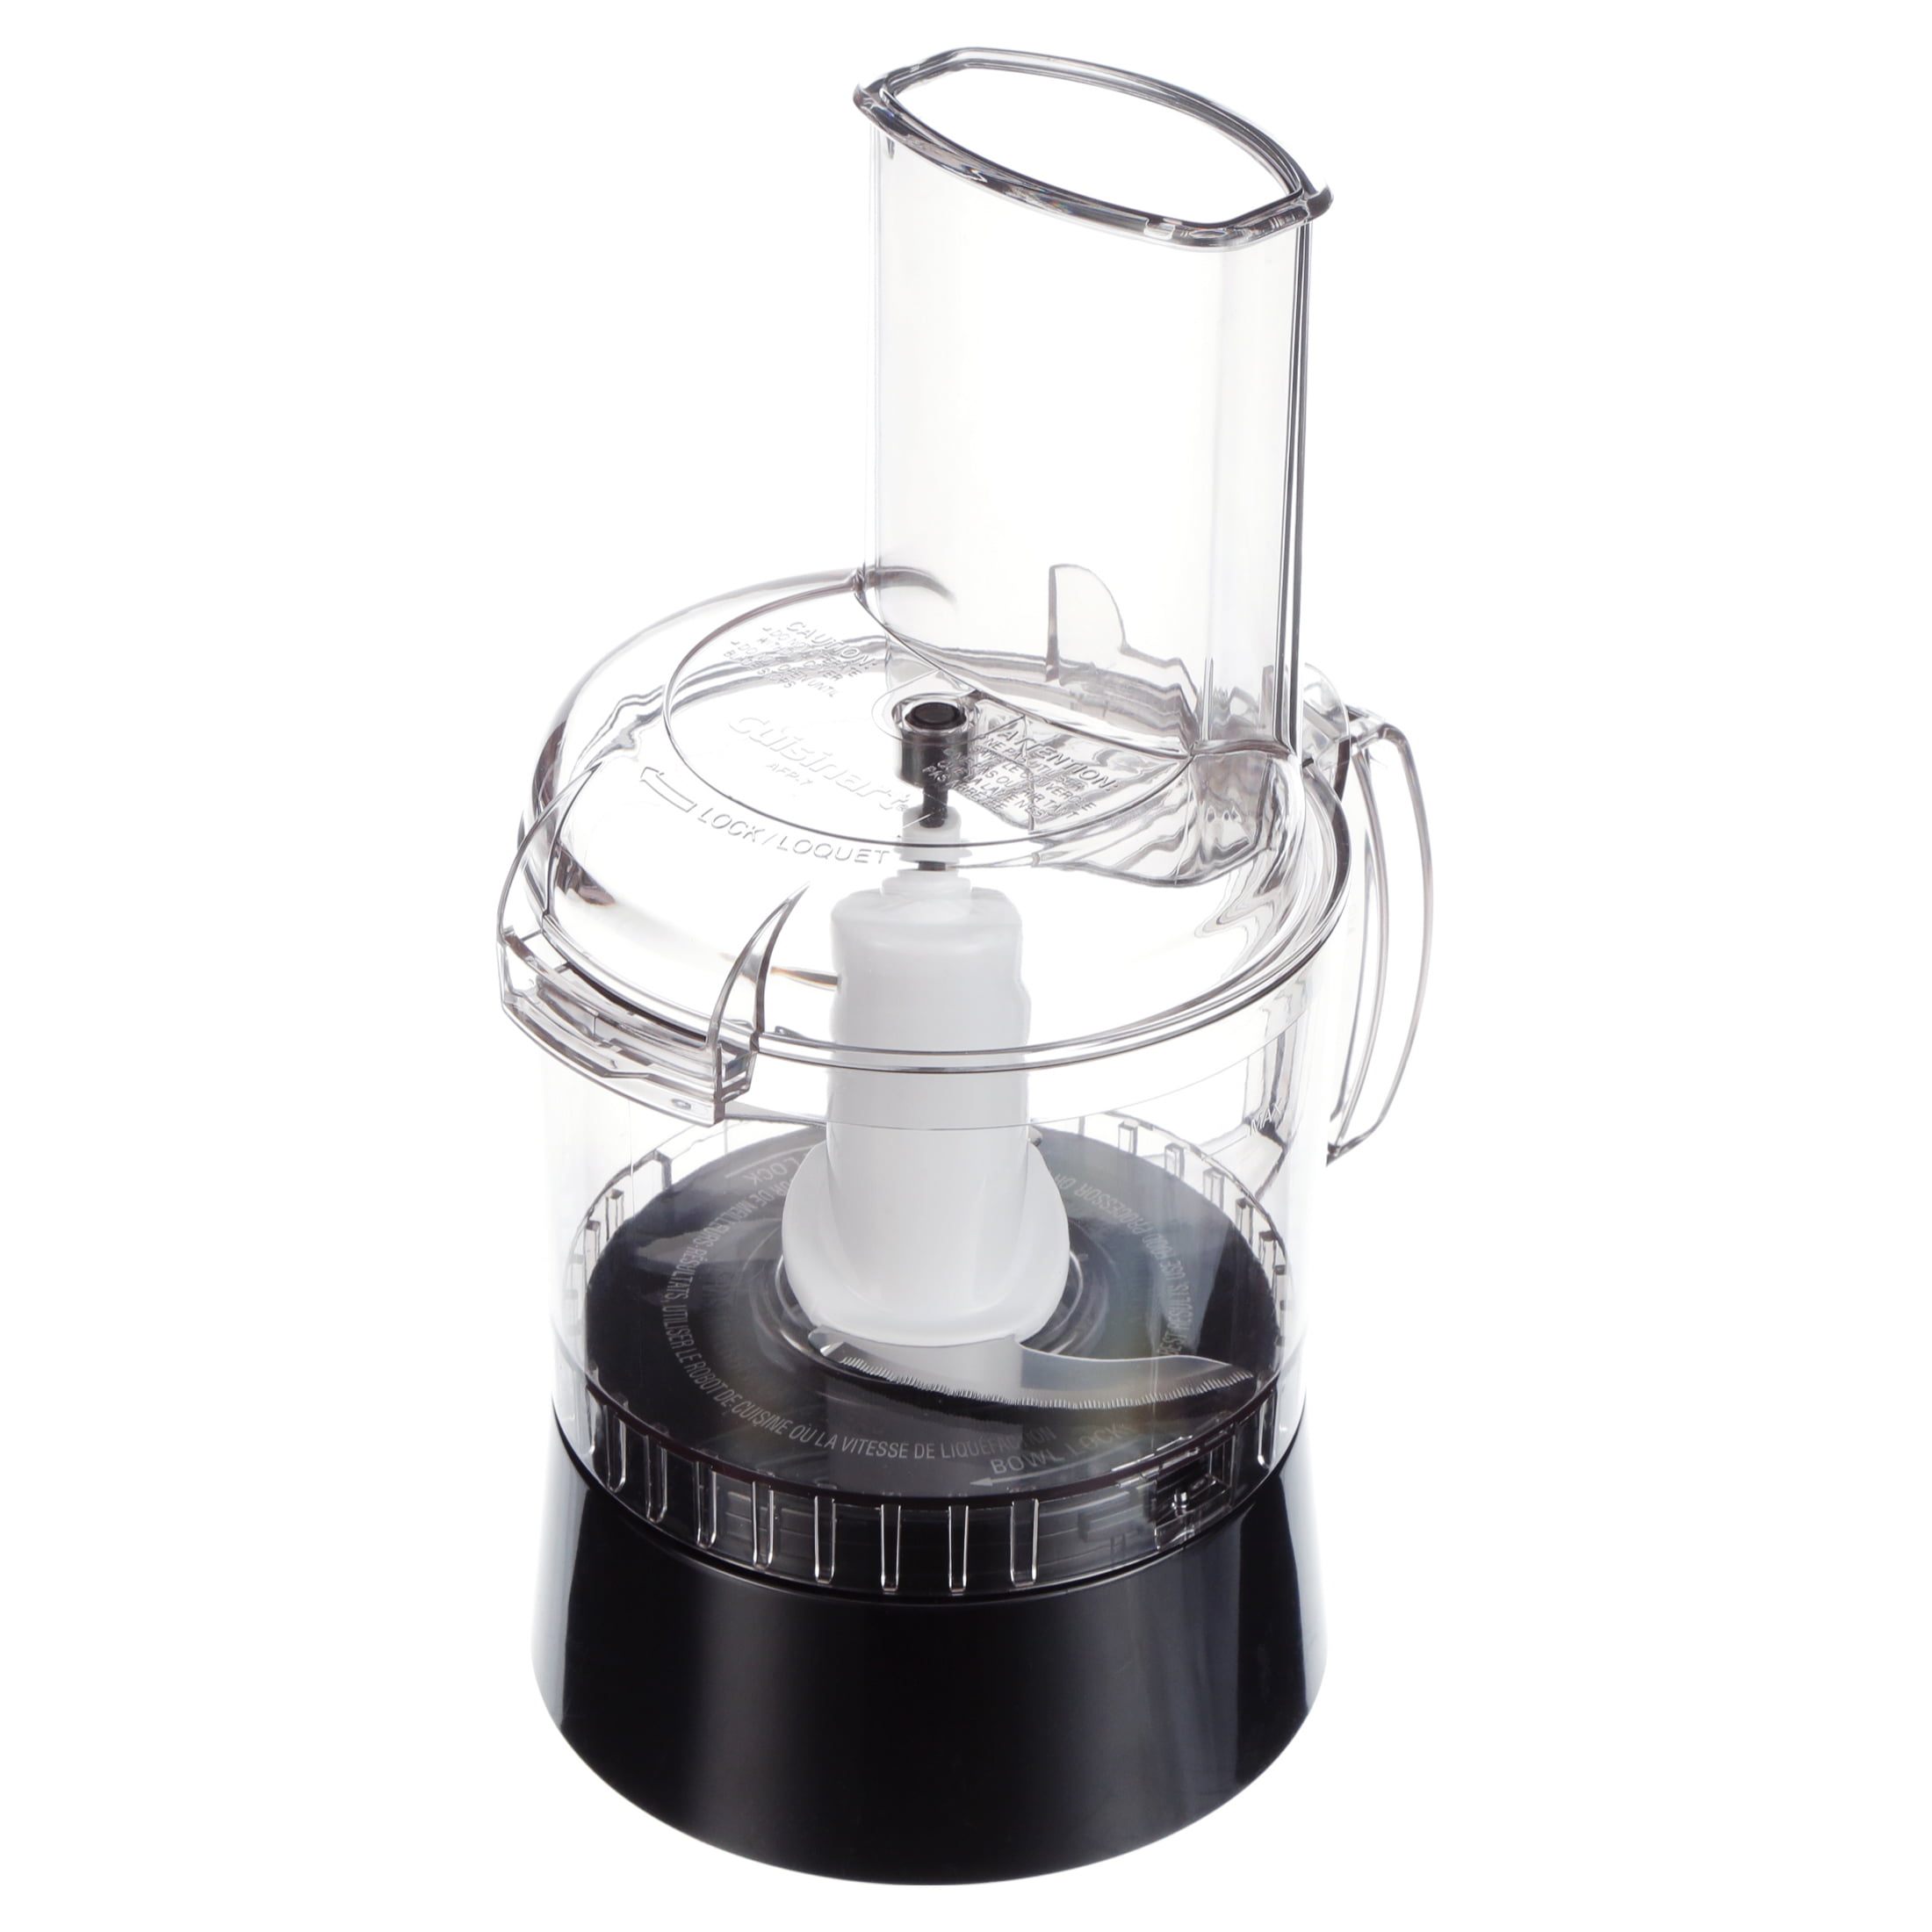 5 Best Blender Food Processor Combos, Tested by Experts